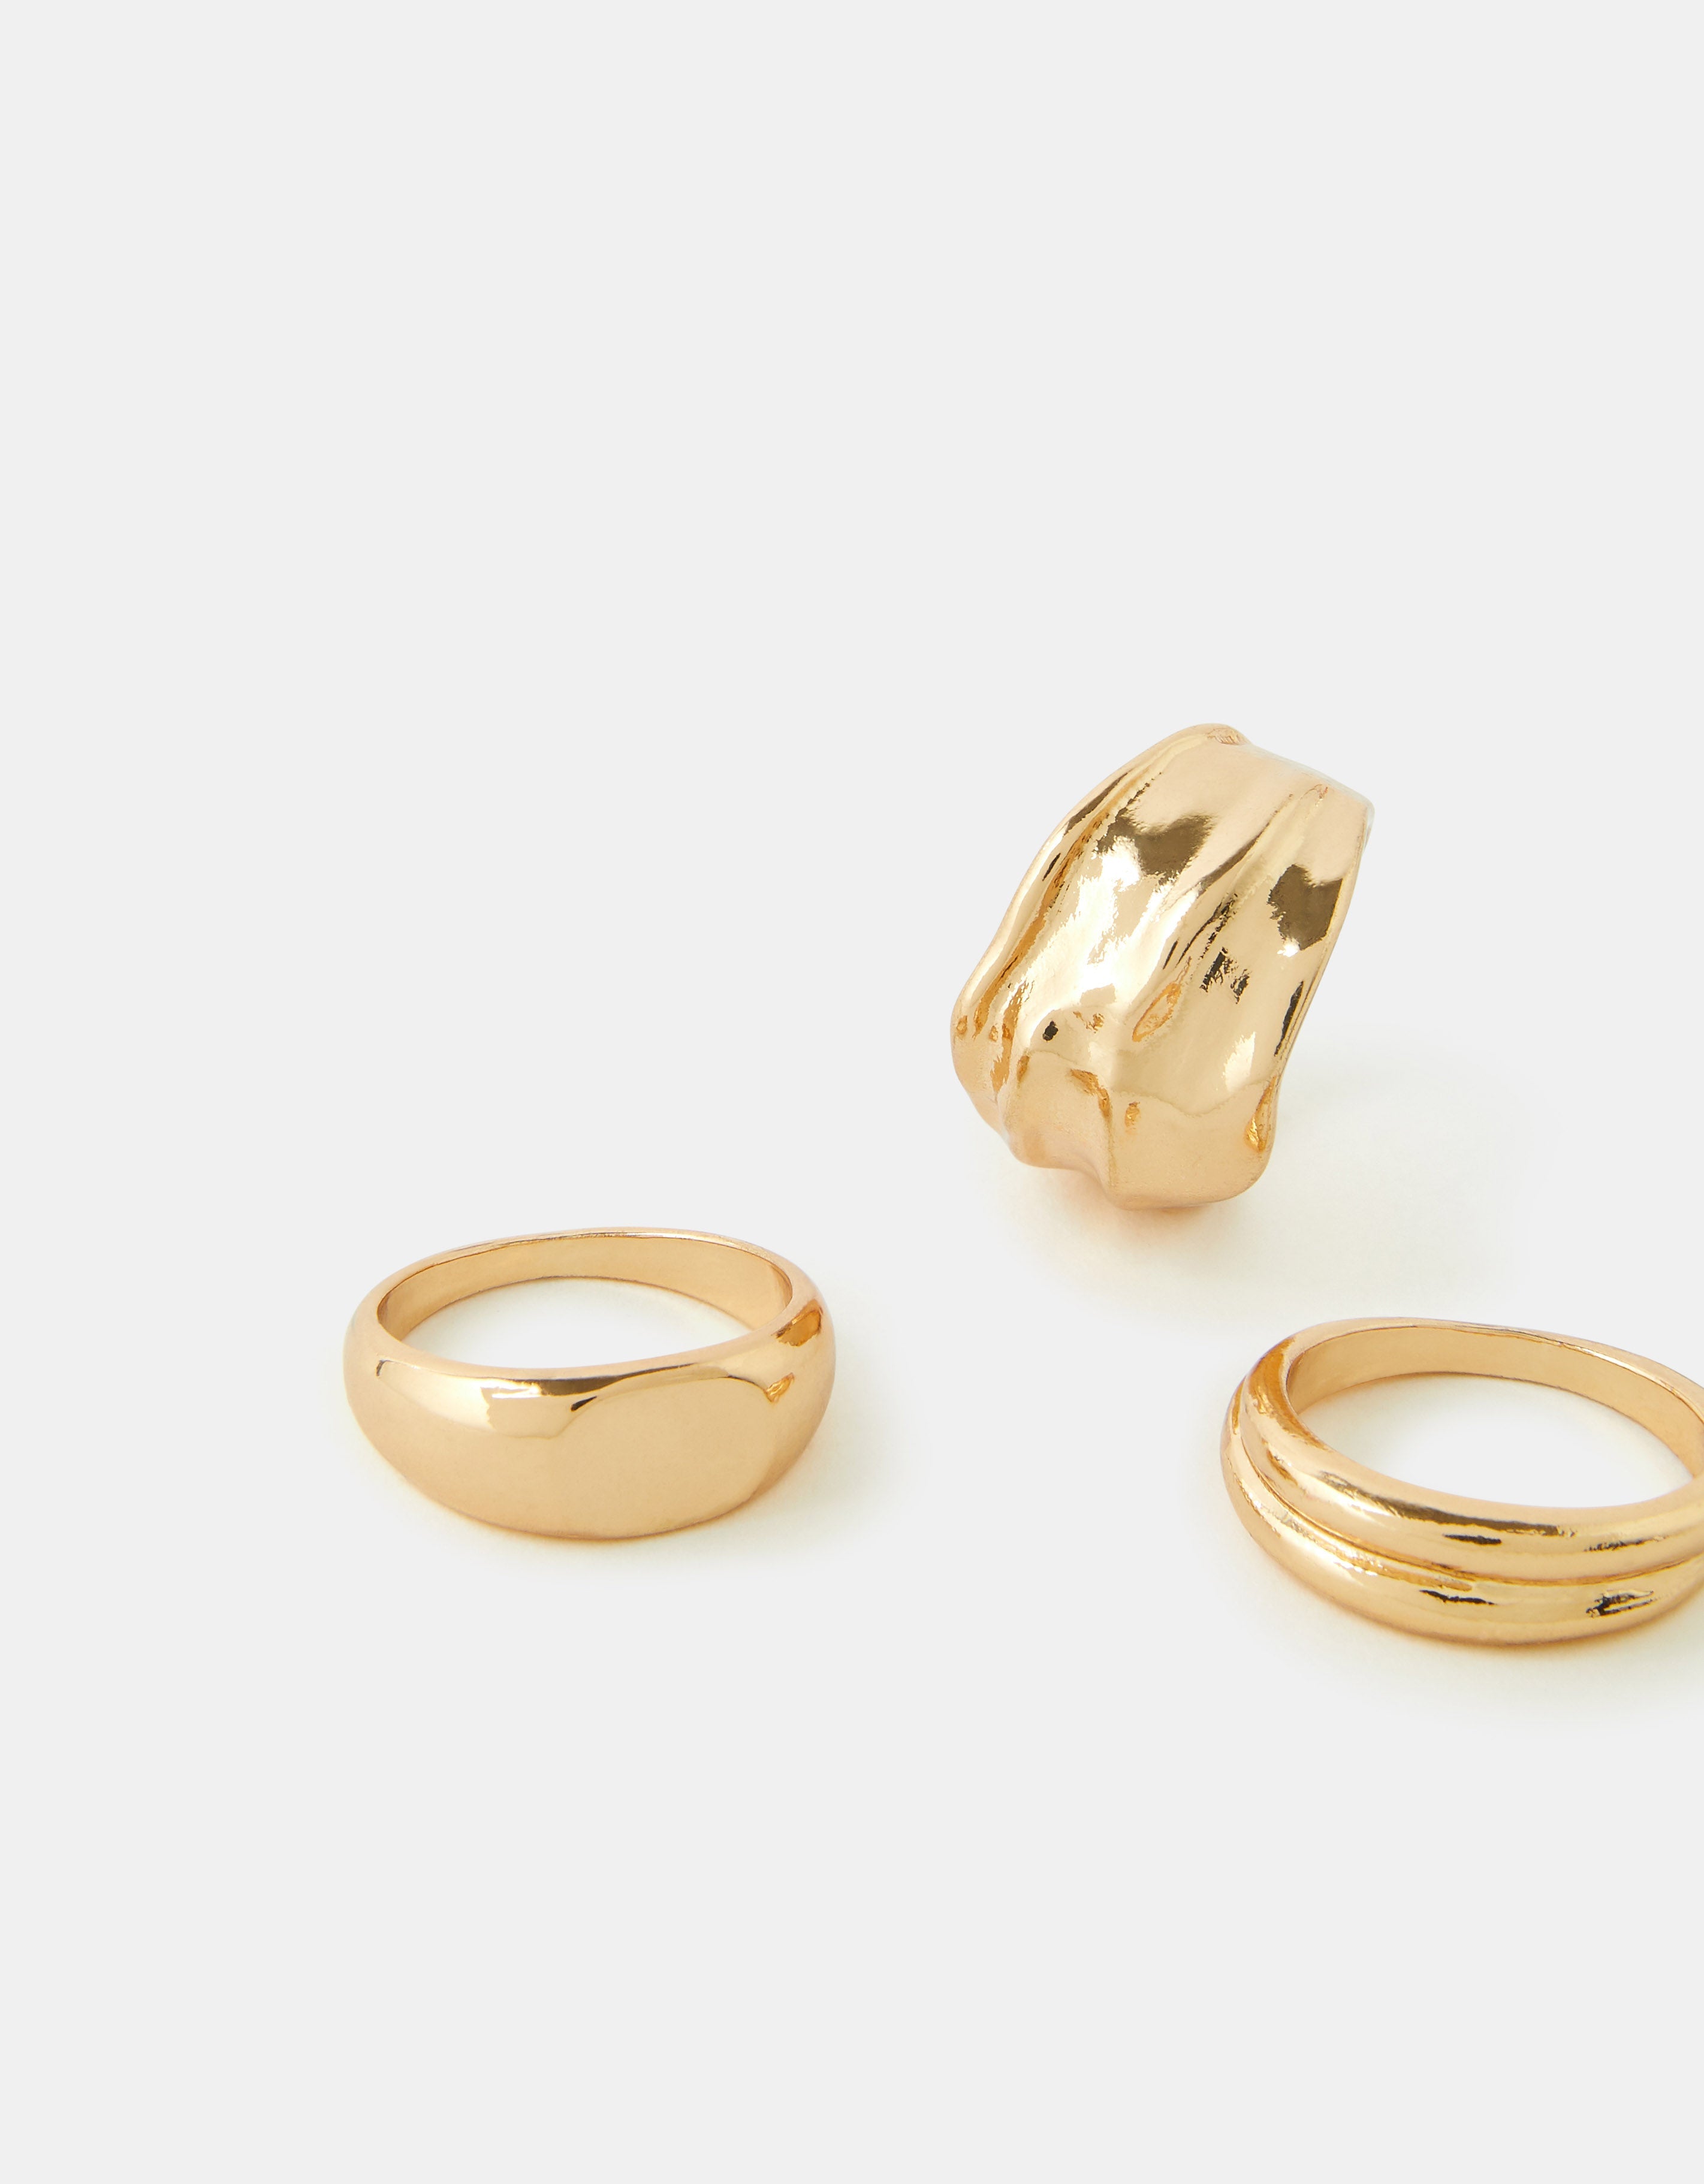 Chunky gold nugget diamond ring by Pernille Holm | Finematter